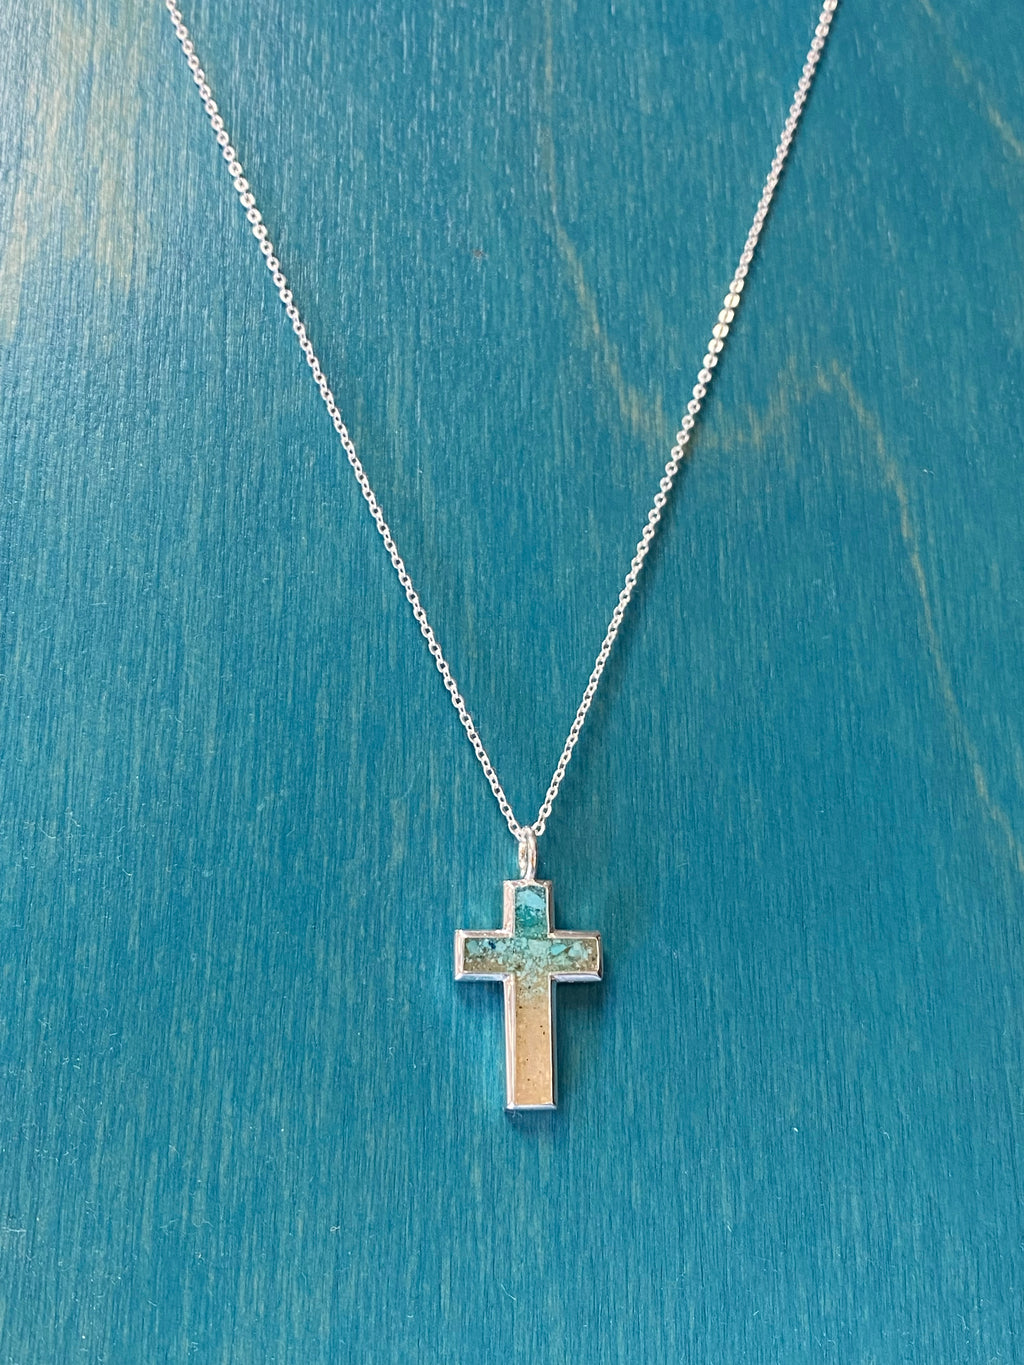 Dune Gradient Cross Necklace, Sterling Silver w/ Turquoise & Sand